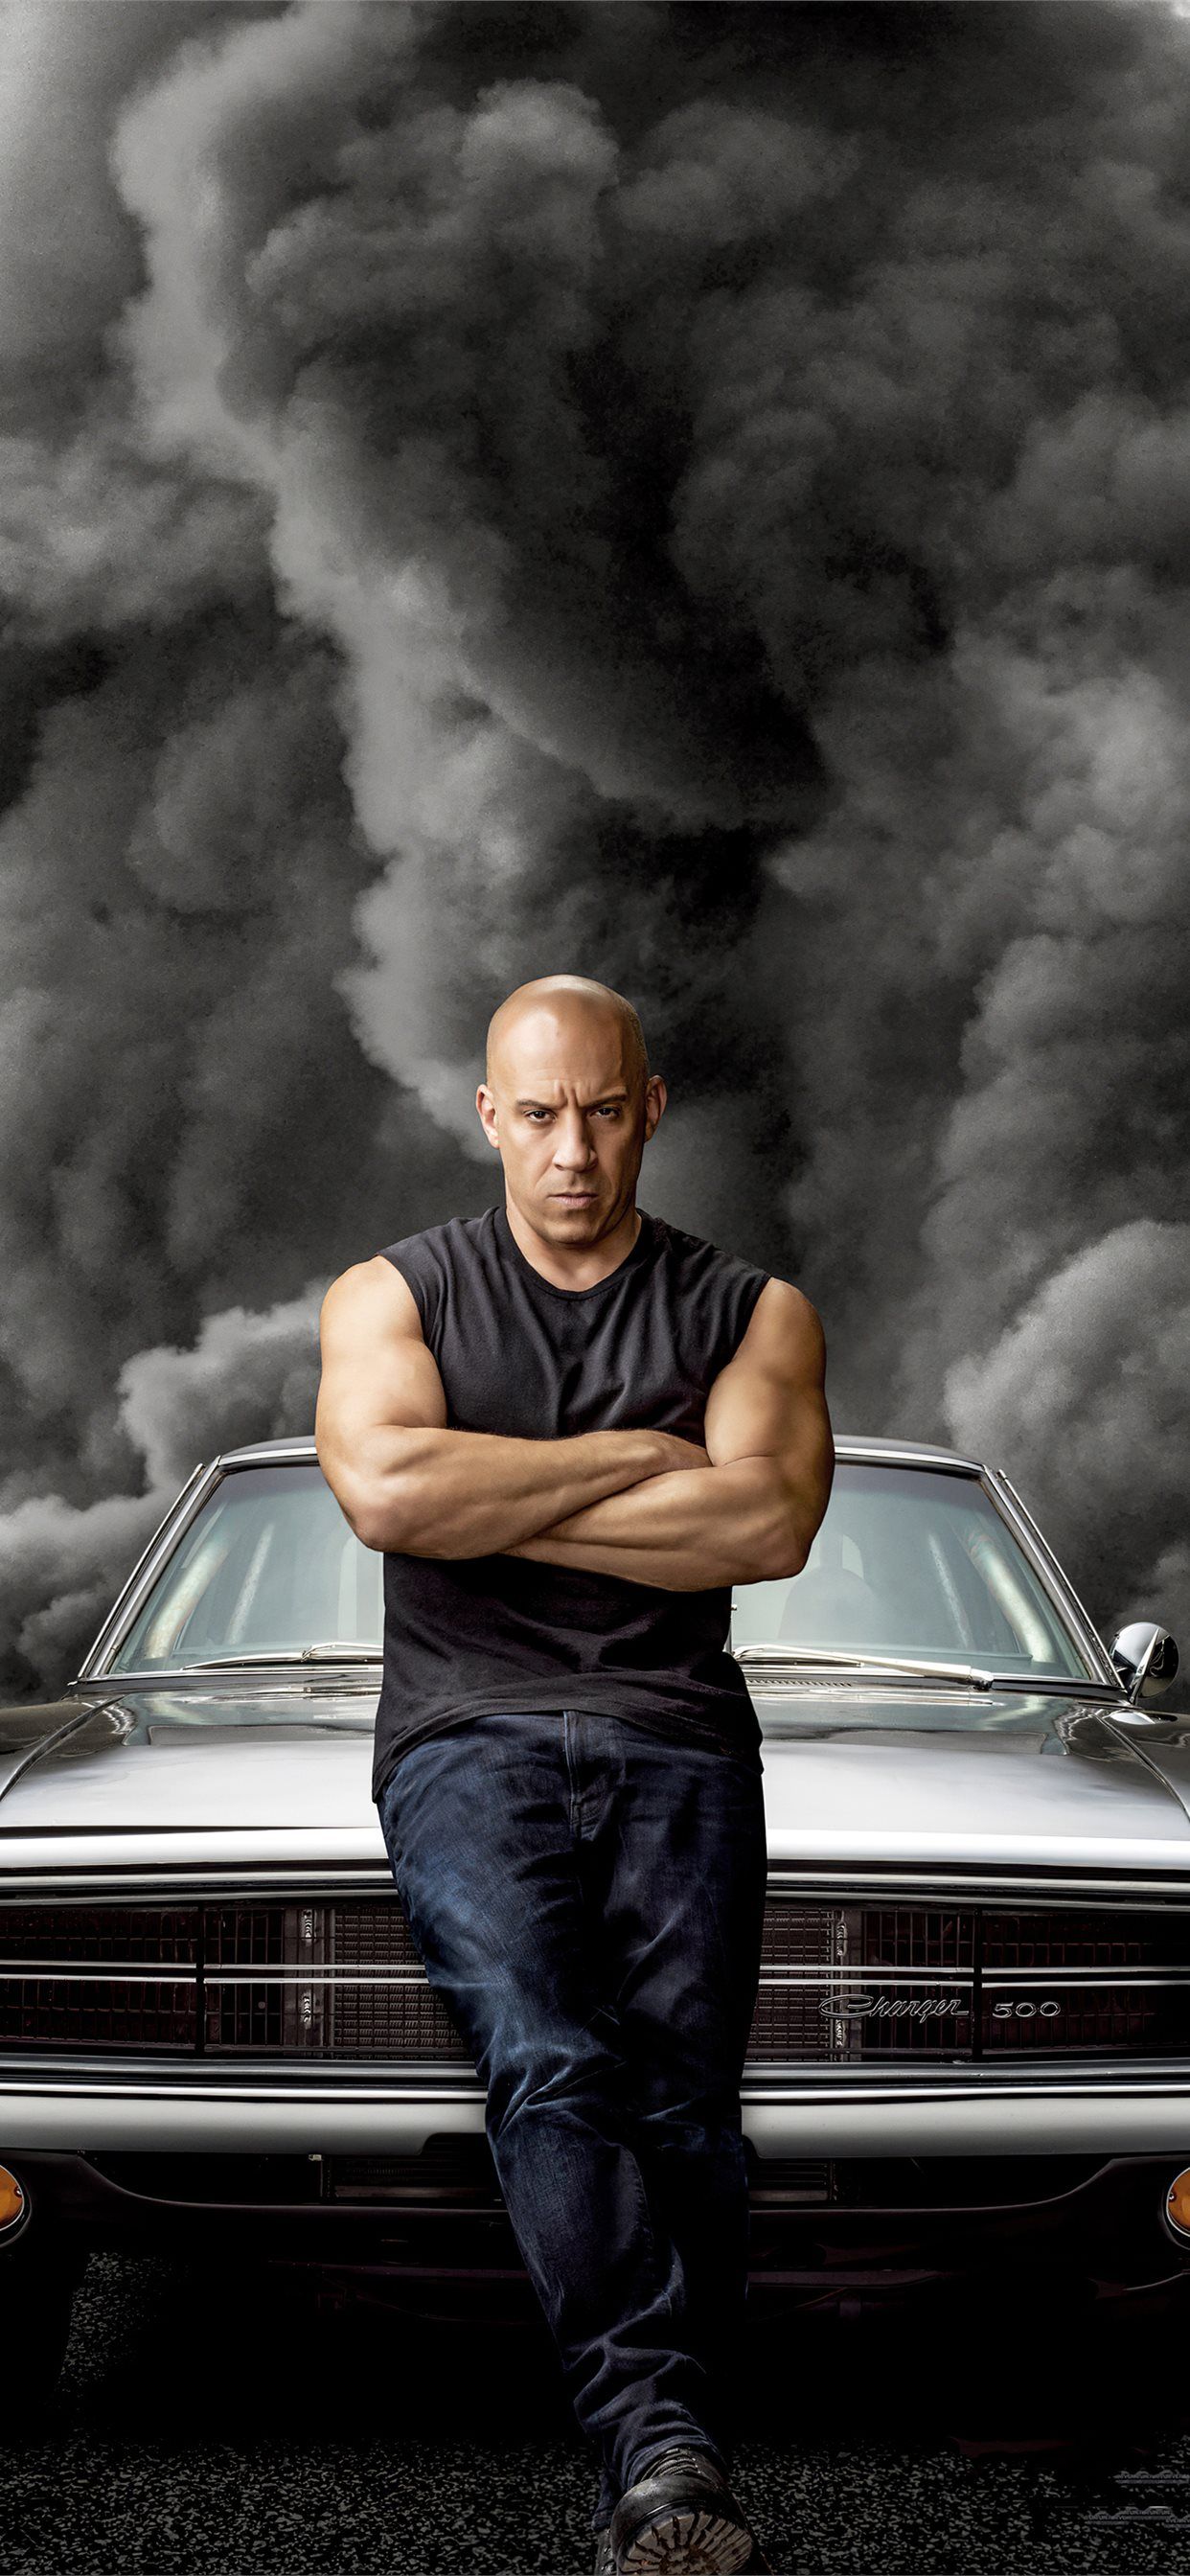 dominic toretto in fast and furious 9 2020 movie iPhone 11 Wallpaper Free Download